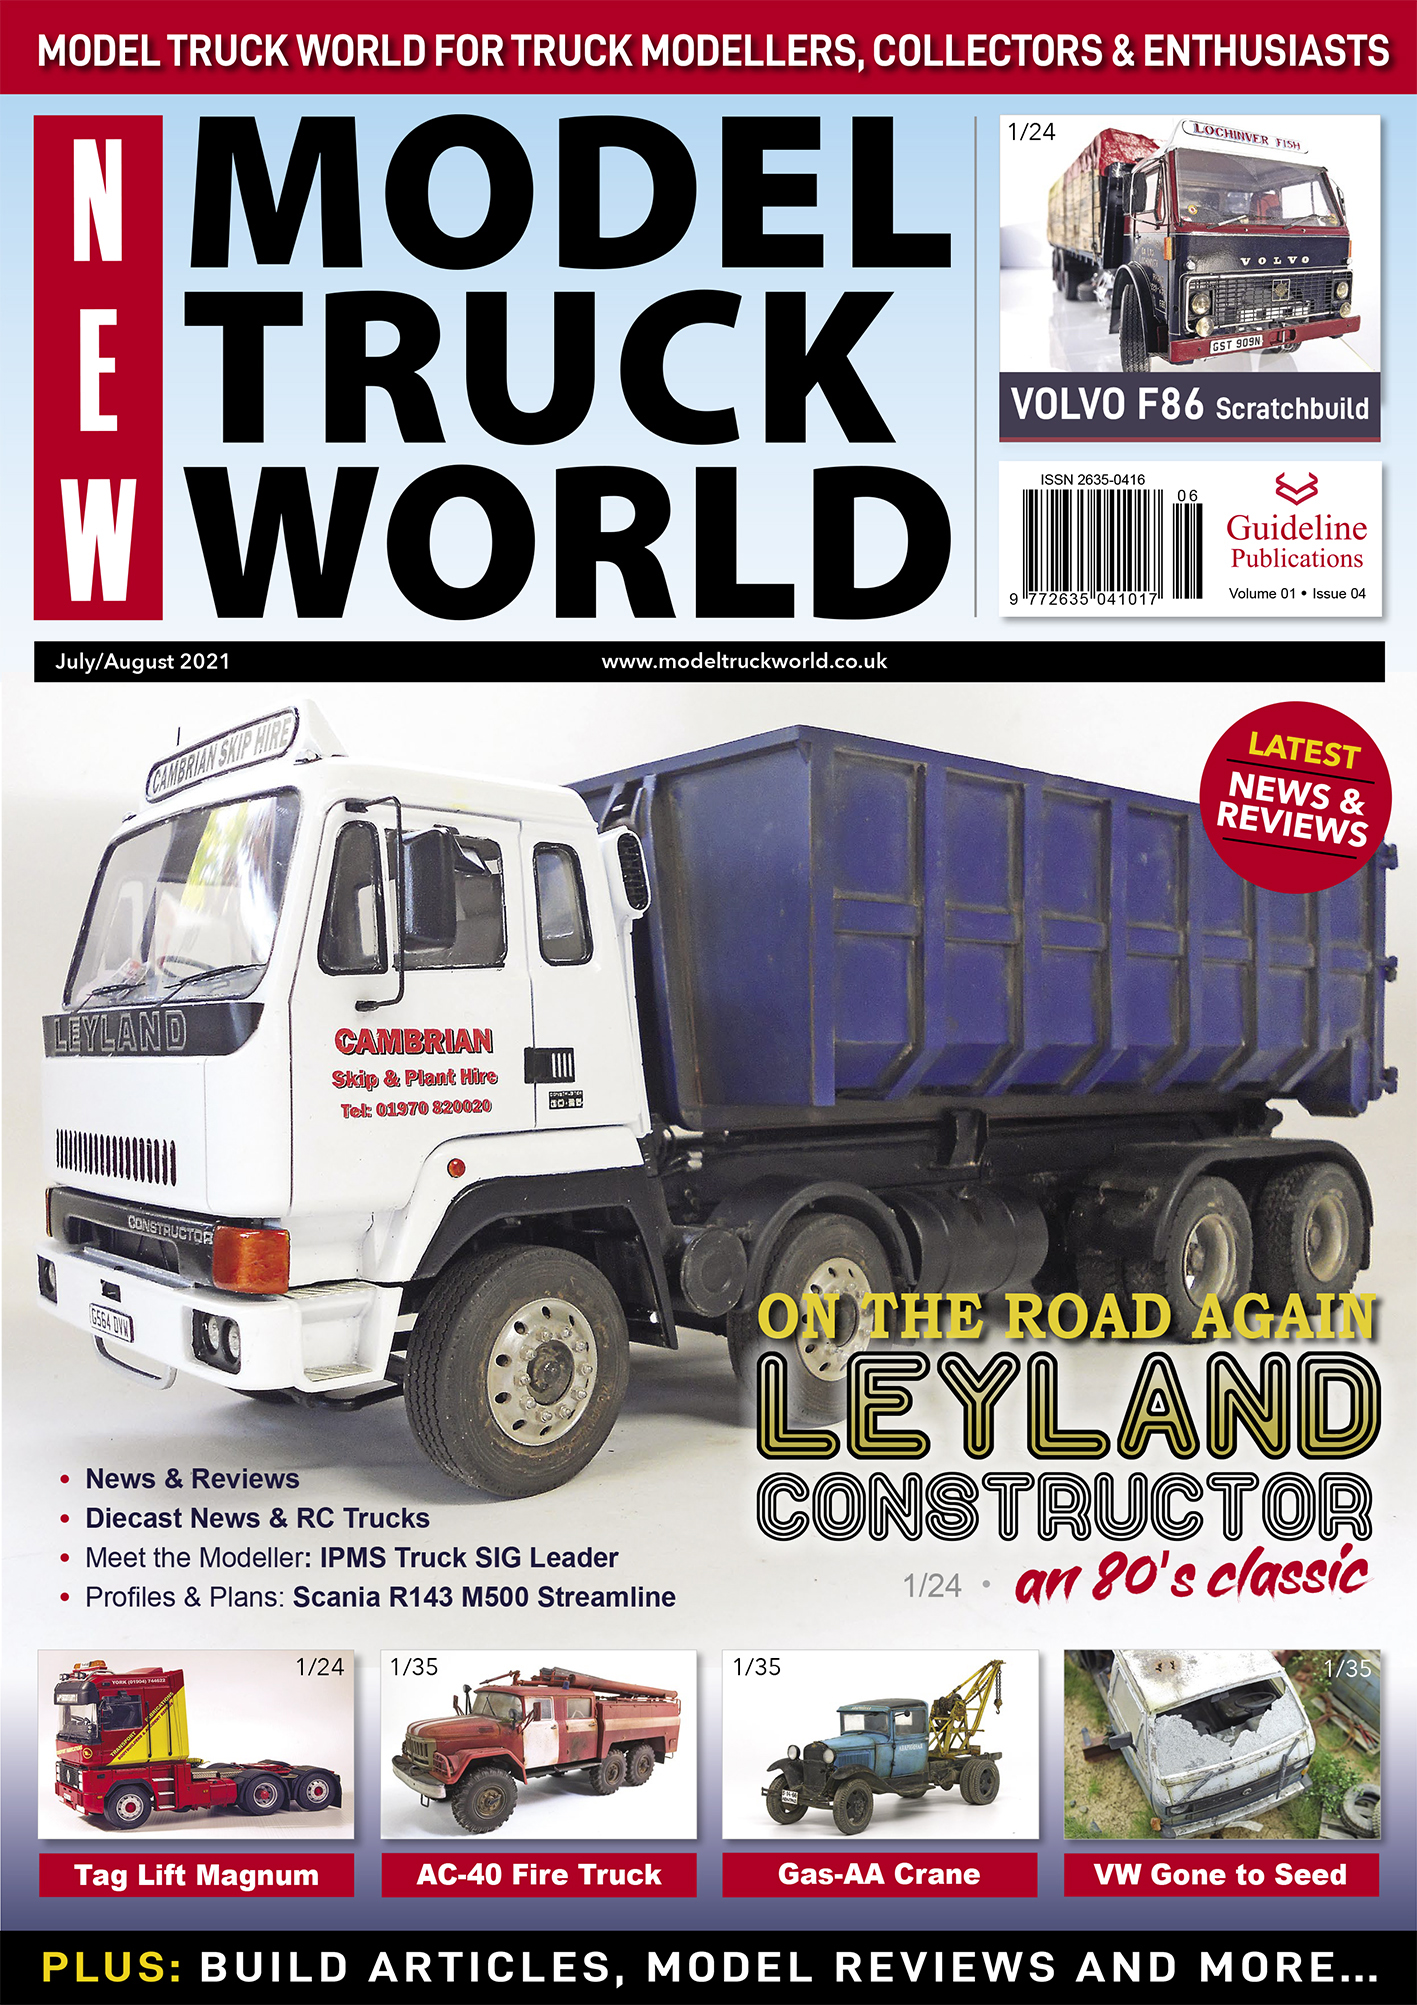 Guideline Publications Ltd New Model Truck World  - Issue 04 July/Aug21 Vol 01 - Issue 04 